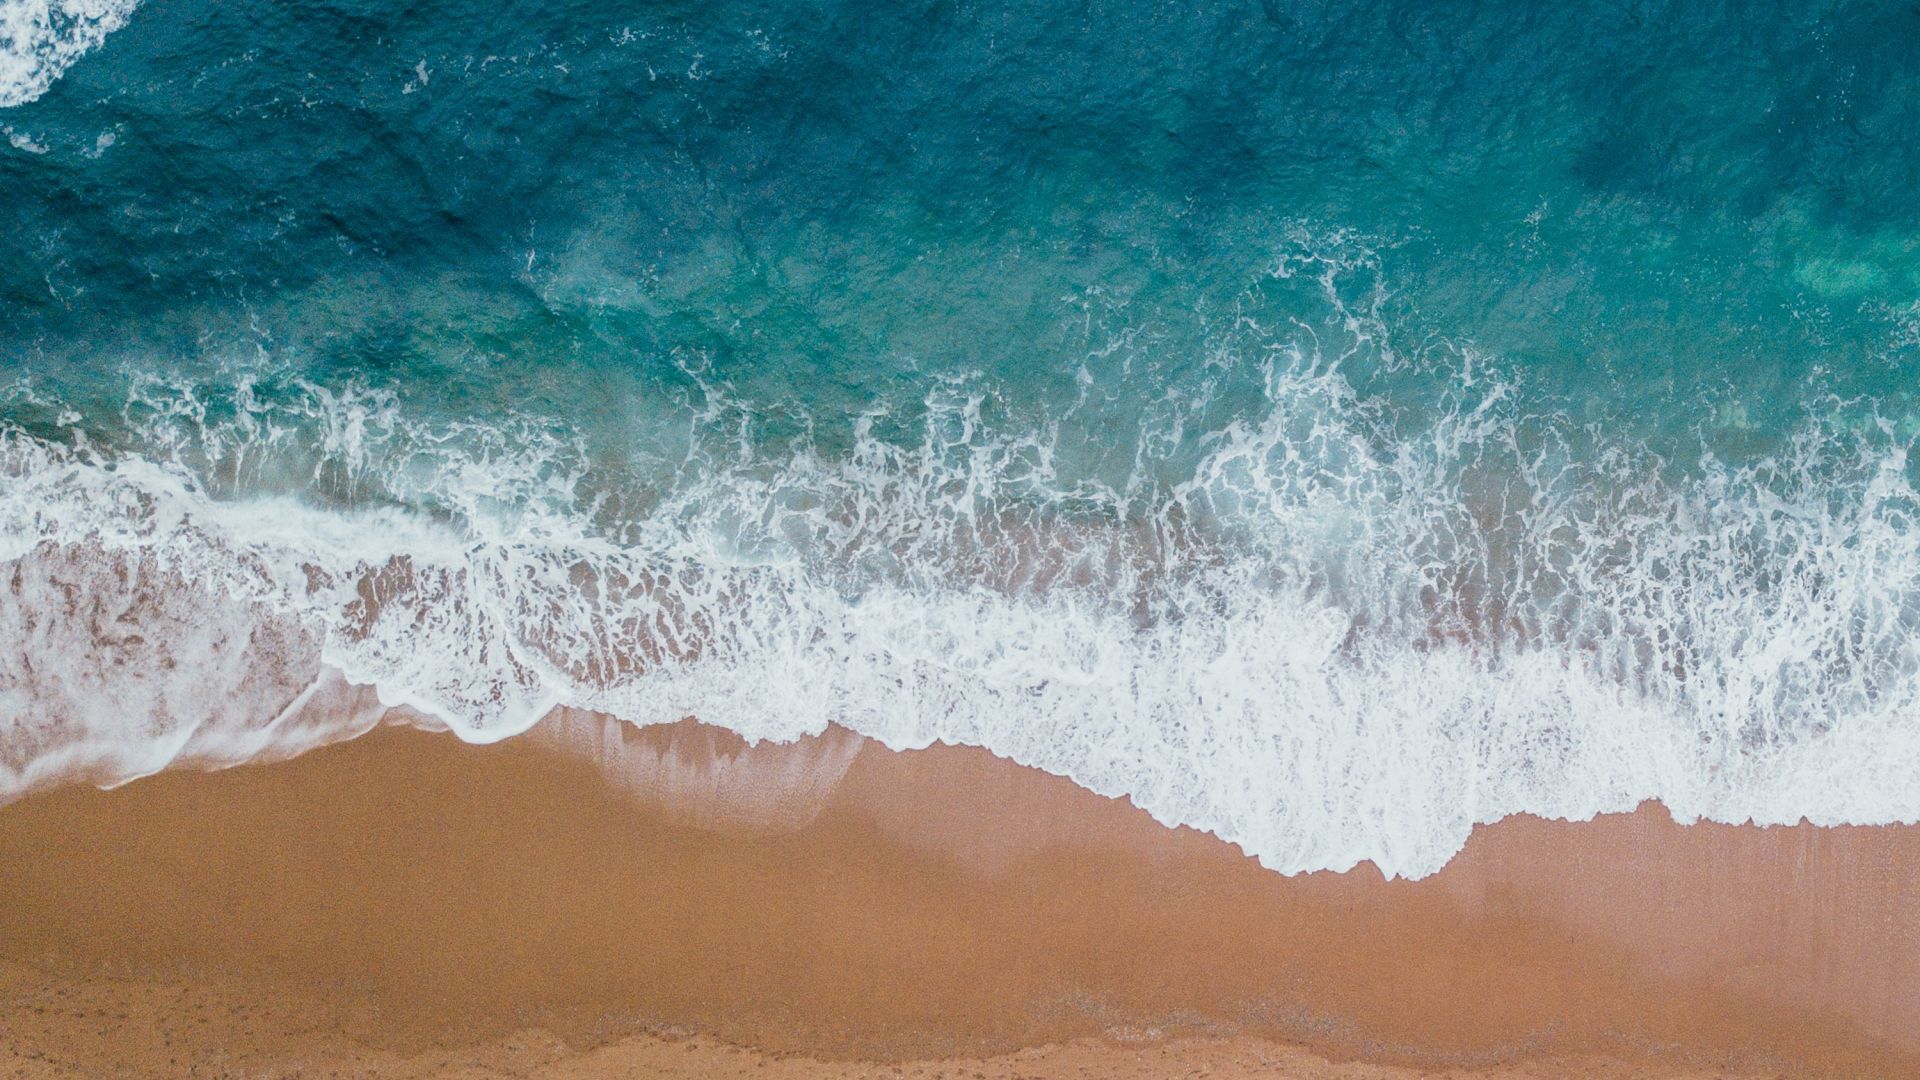 Desktop wallpaper the waves beach aerial view blue sea hd image picture background d